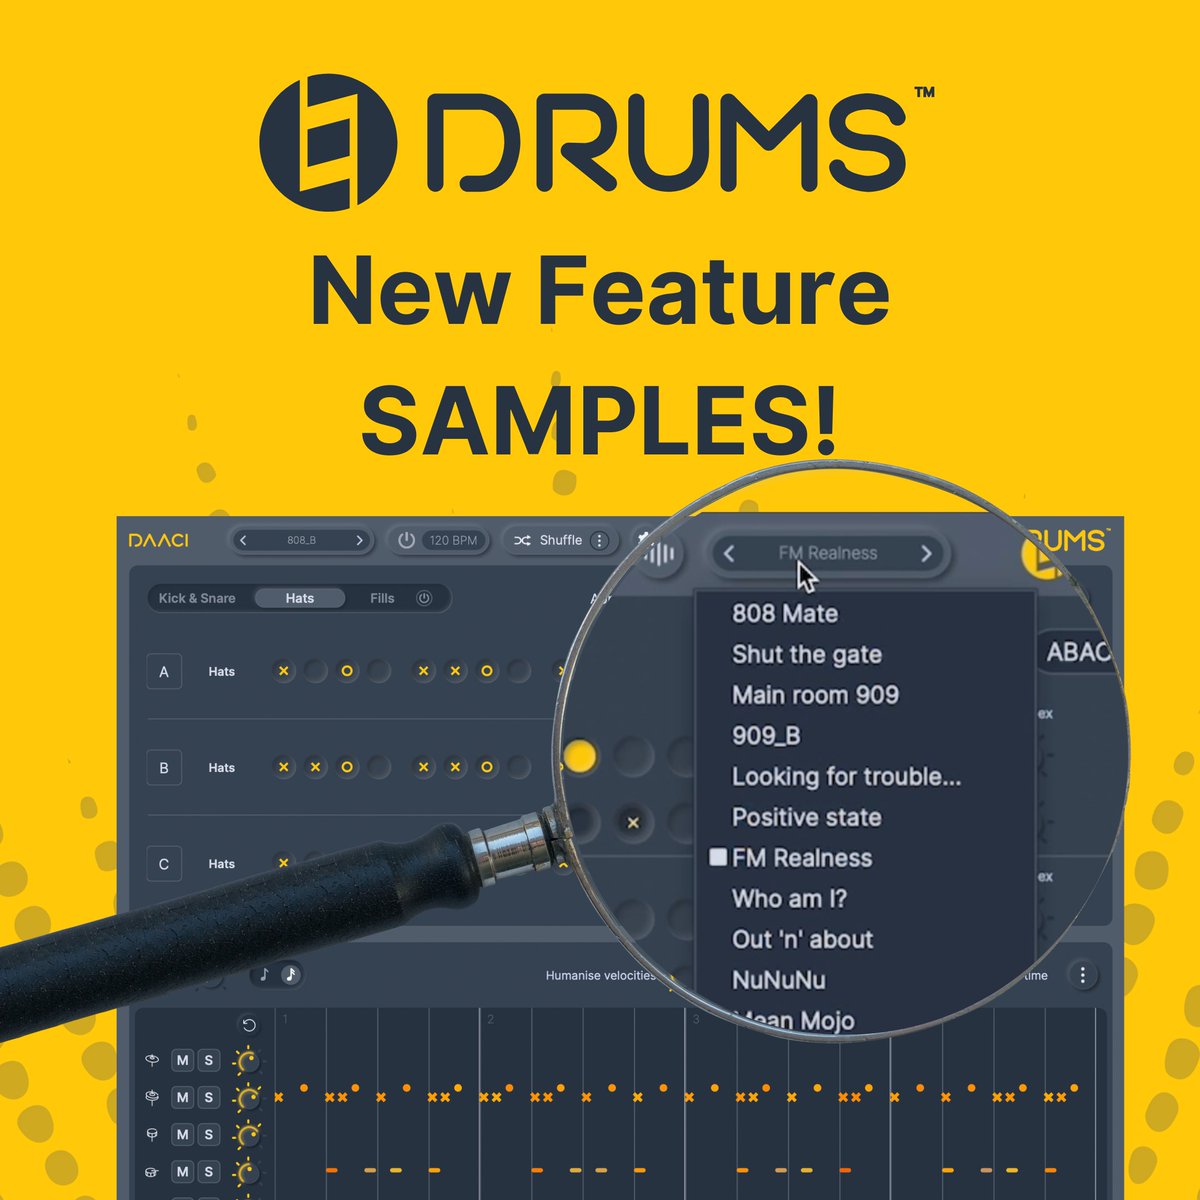 We've added a suite of electronic DAACI drum samples to the latest version of Natural Drums (Beta). This means you can use Natural Drums (Beta) as a VST/AU instrument, generating both MIDI and audio....